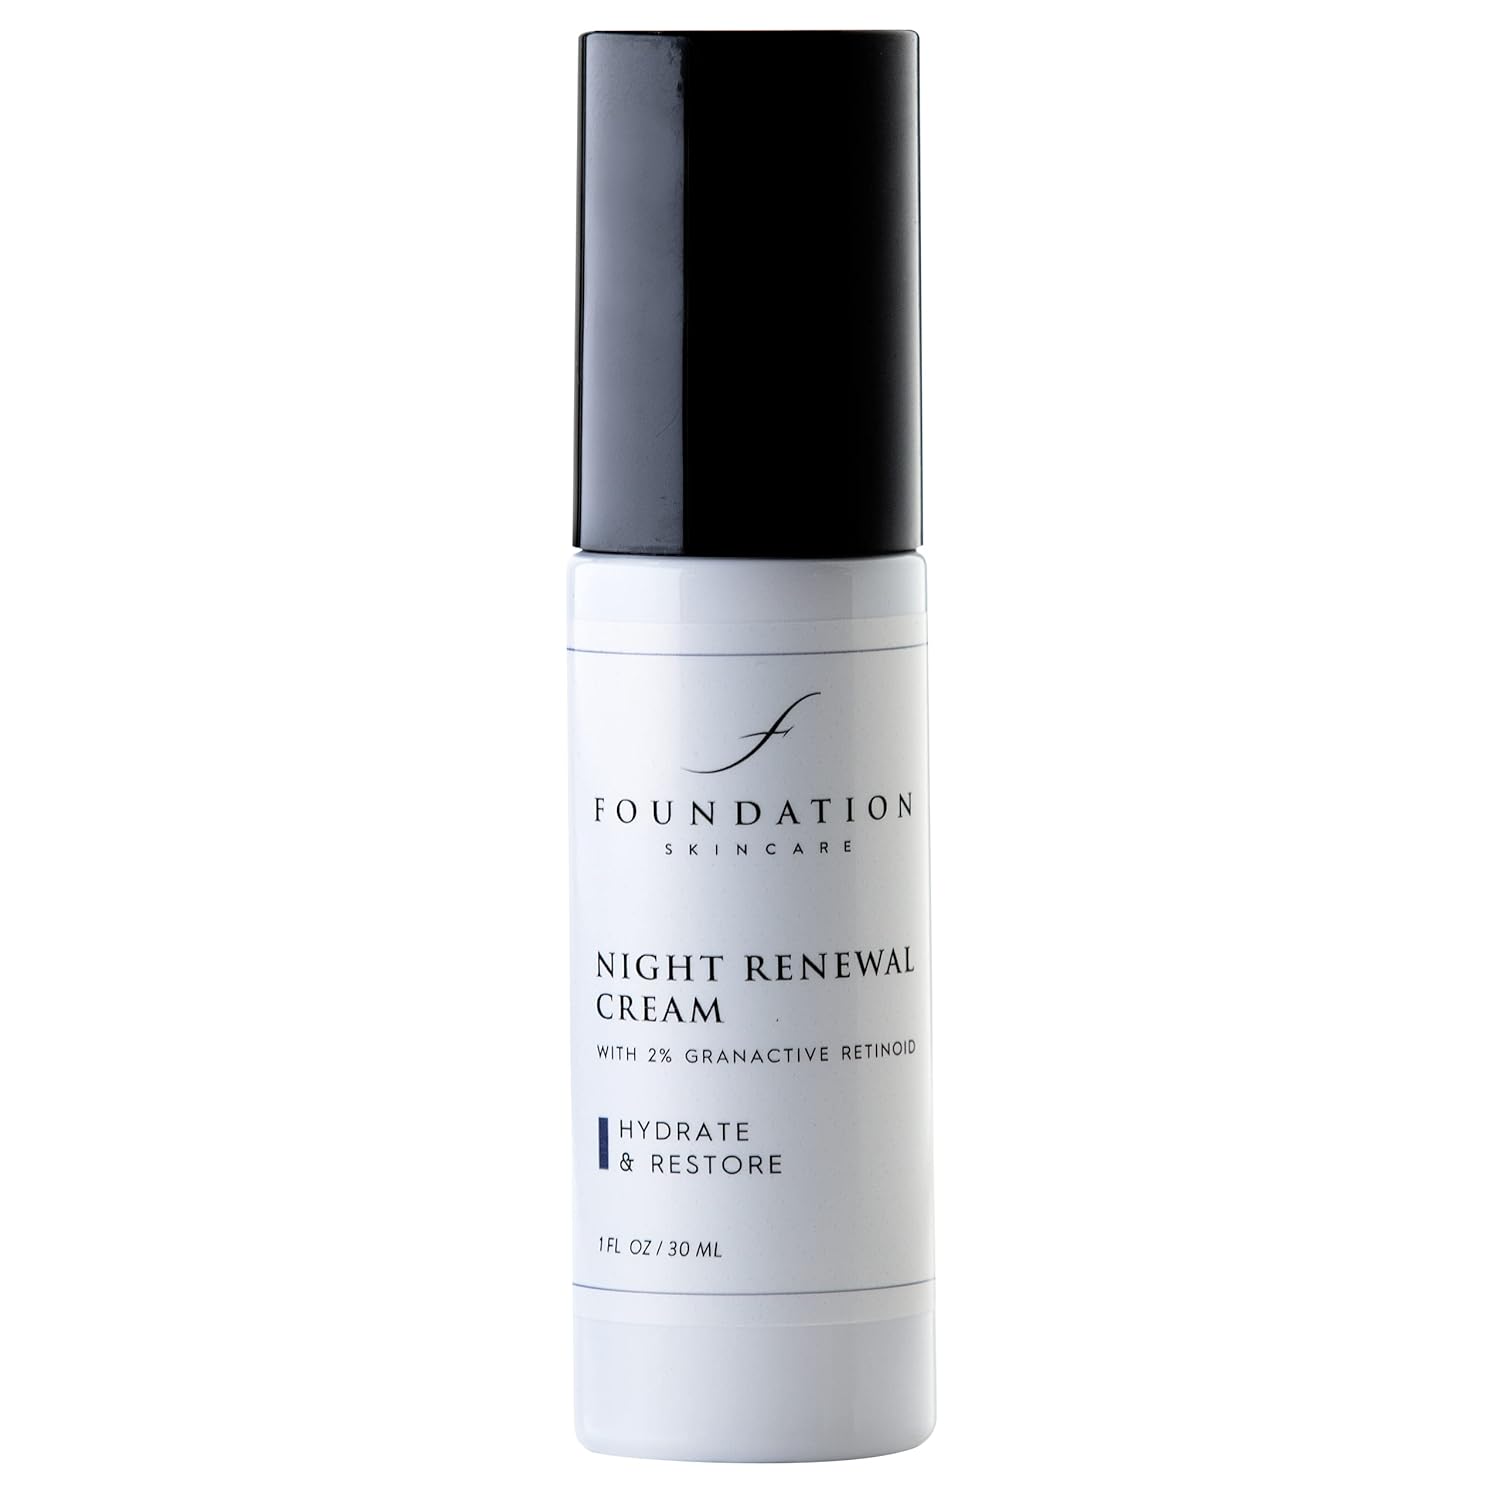 Foundation Skincare Night Renewal Cream - Rejuvenate and Repair Your Skin While You Sleep for a Radiant and Youthful Appearance - 1